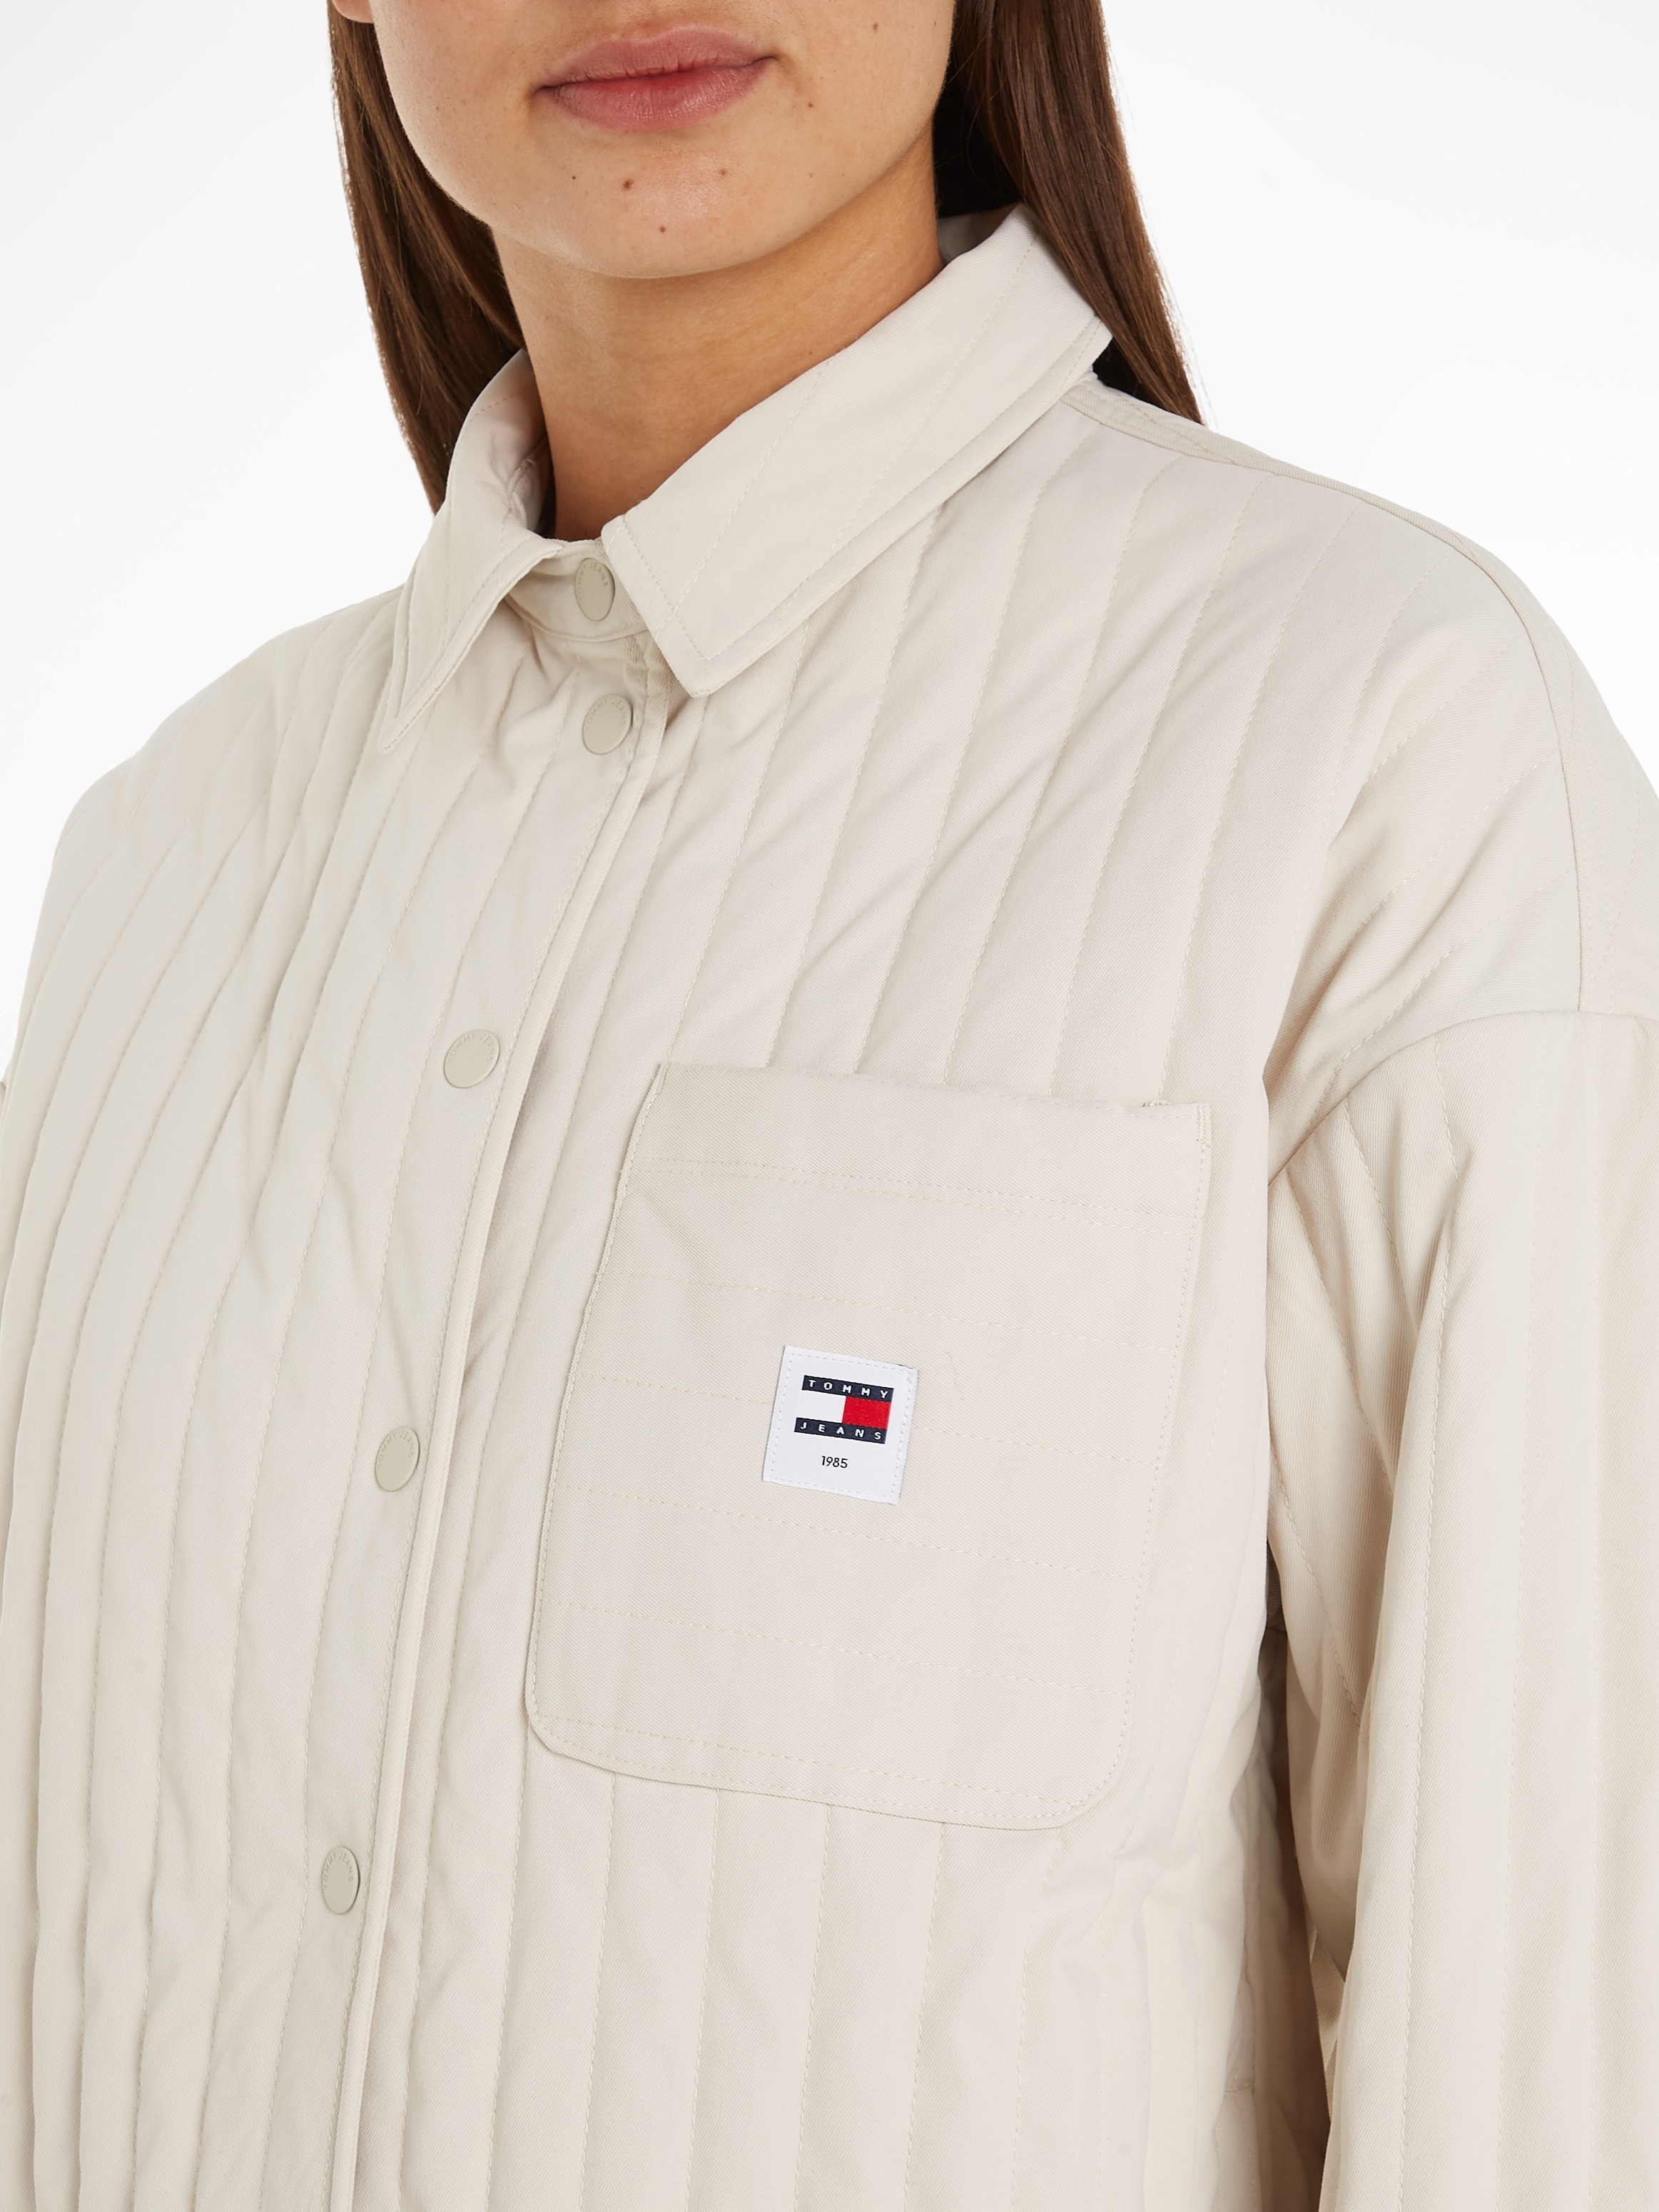 Tommy Jeans Blusentop »TJW QUILTED OVERSHIRT«, mit Logopatch online kaufen  | I'm walking